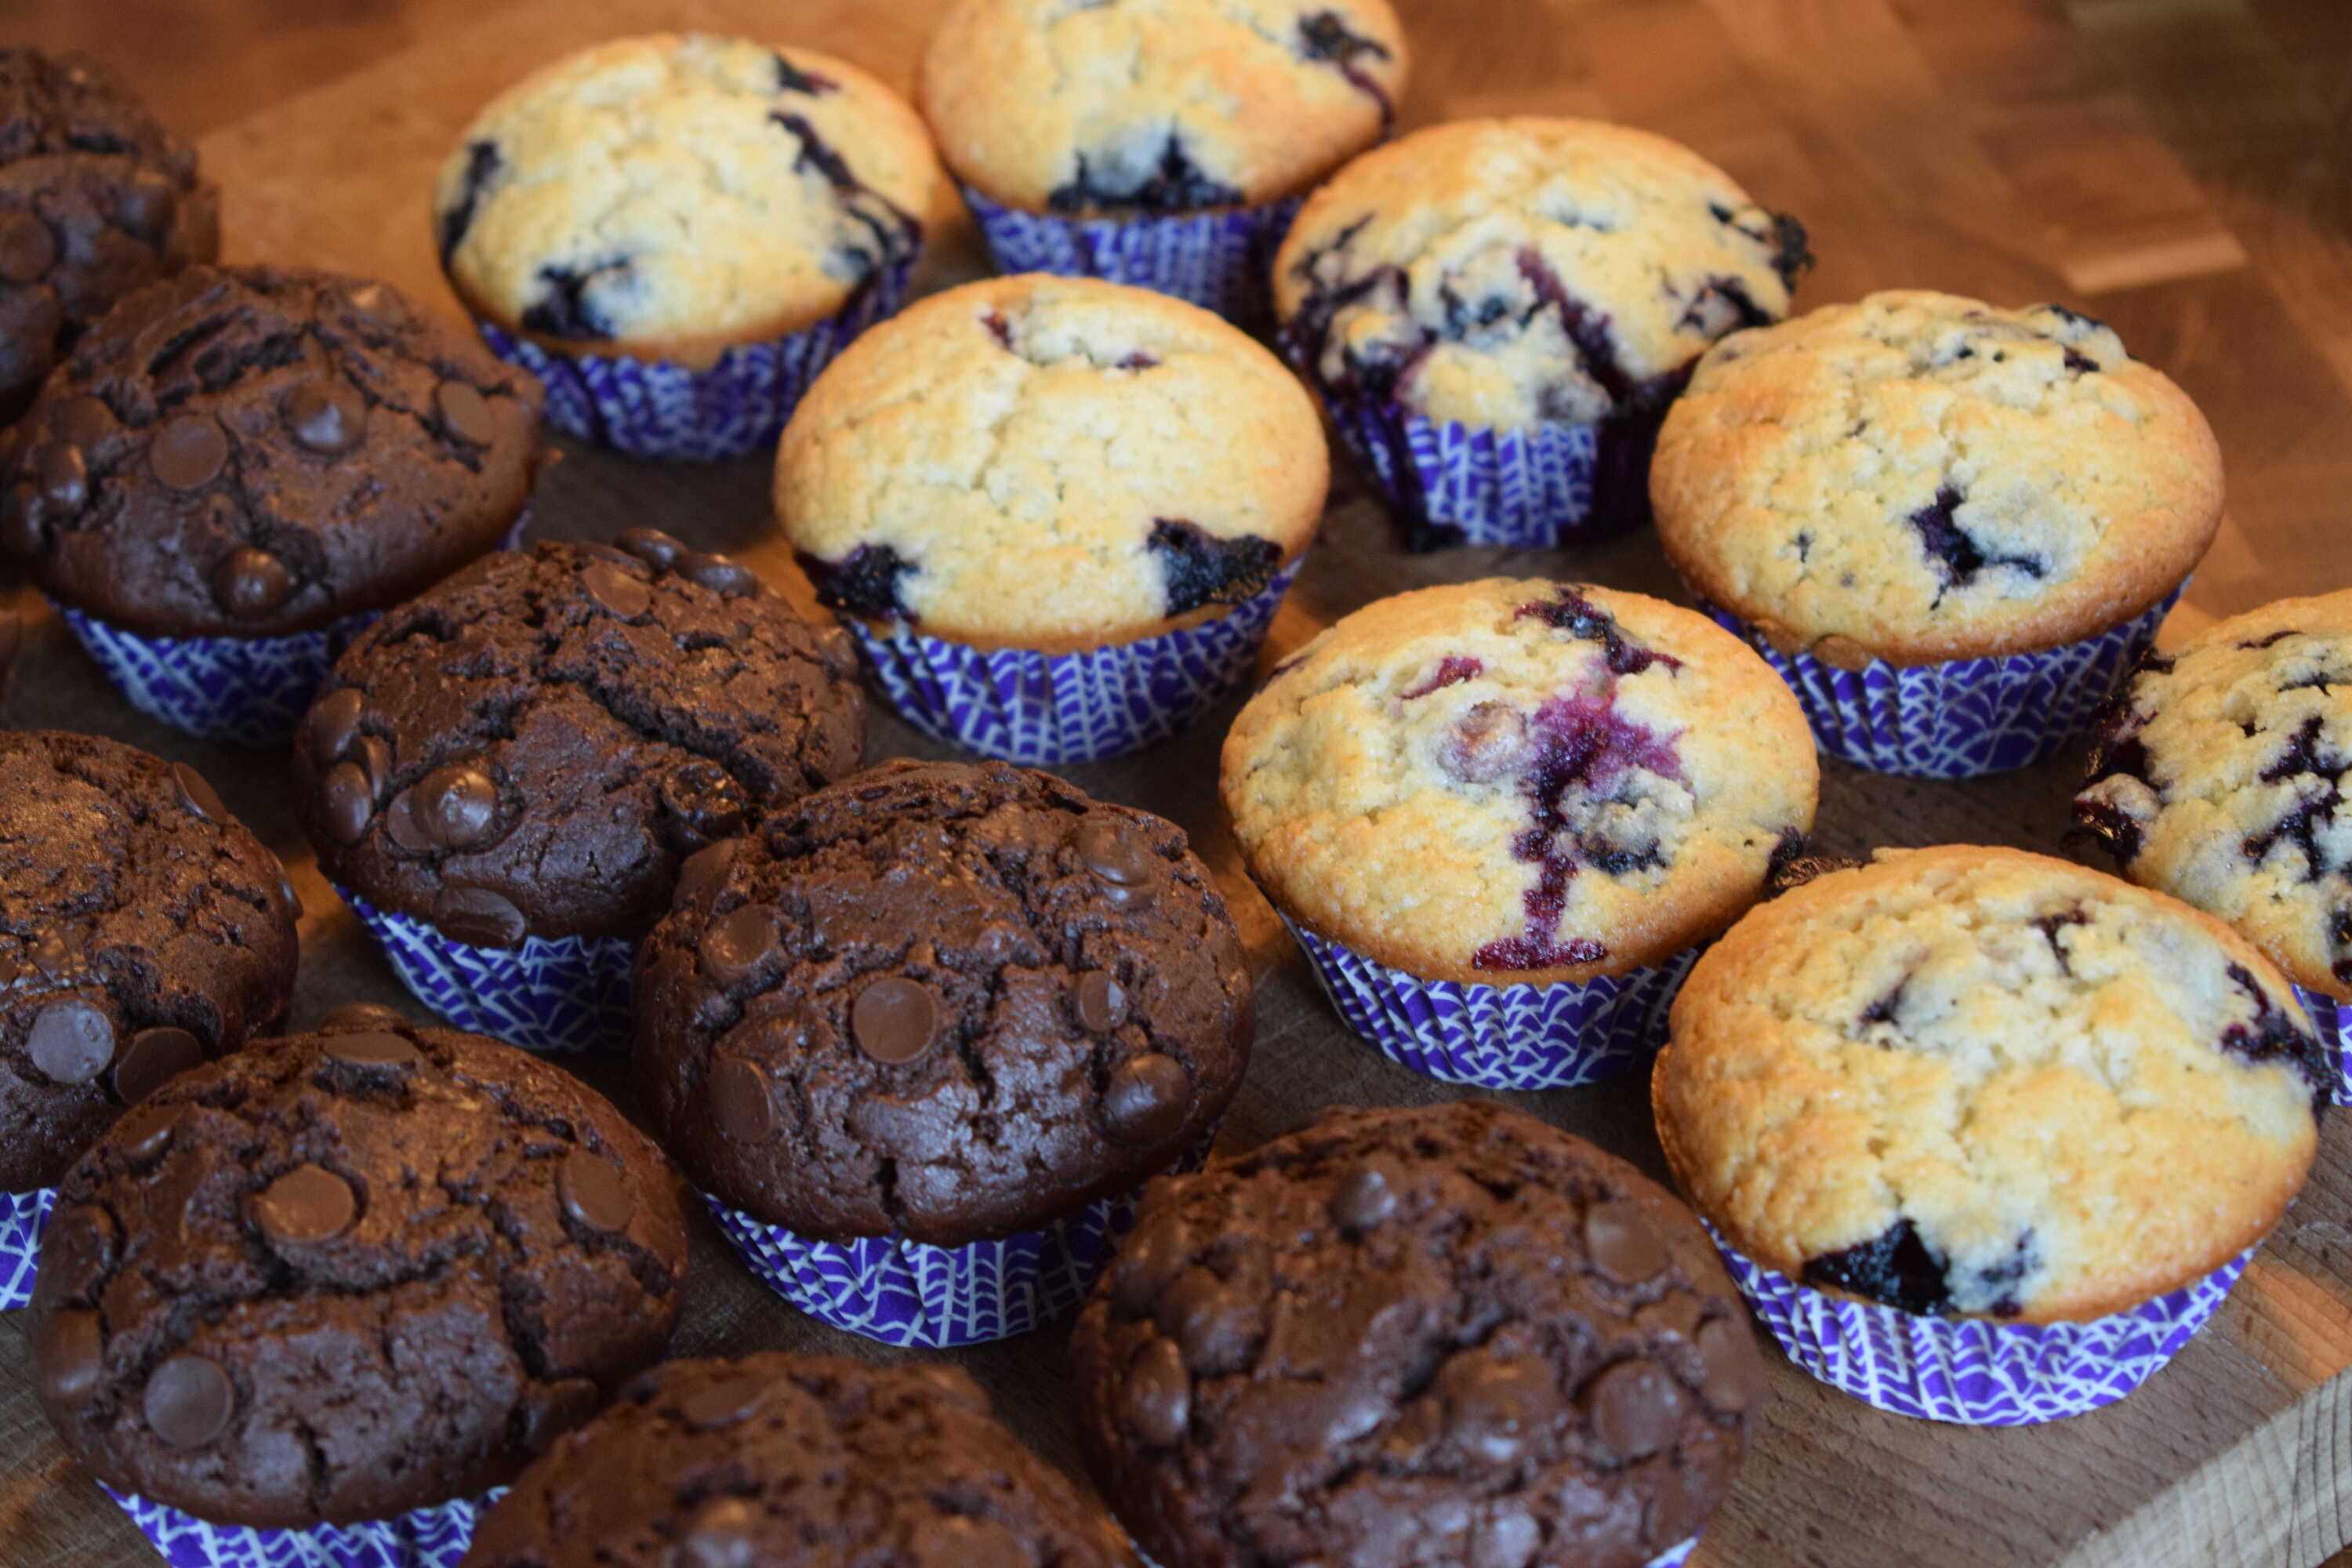 Chocolate and blueberry muffins